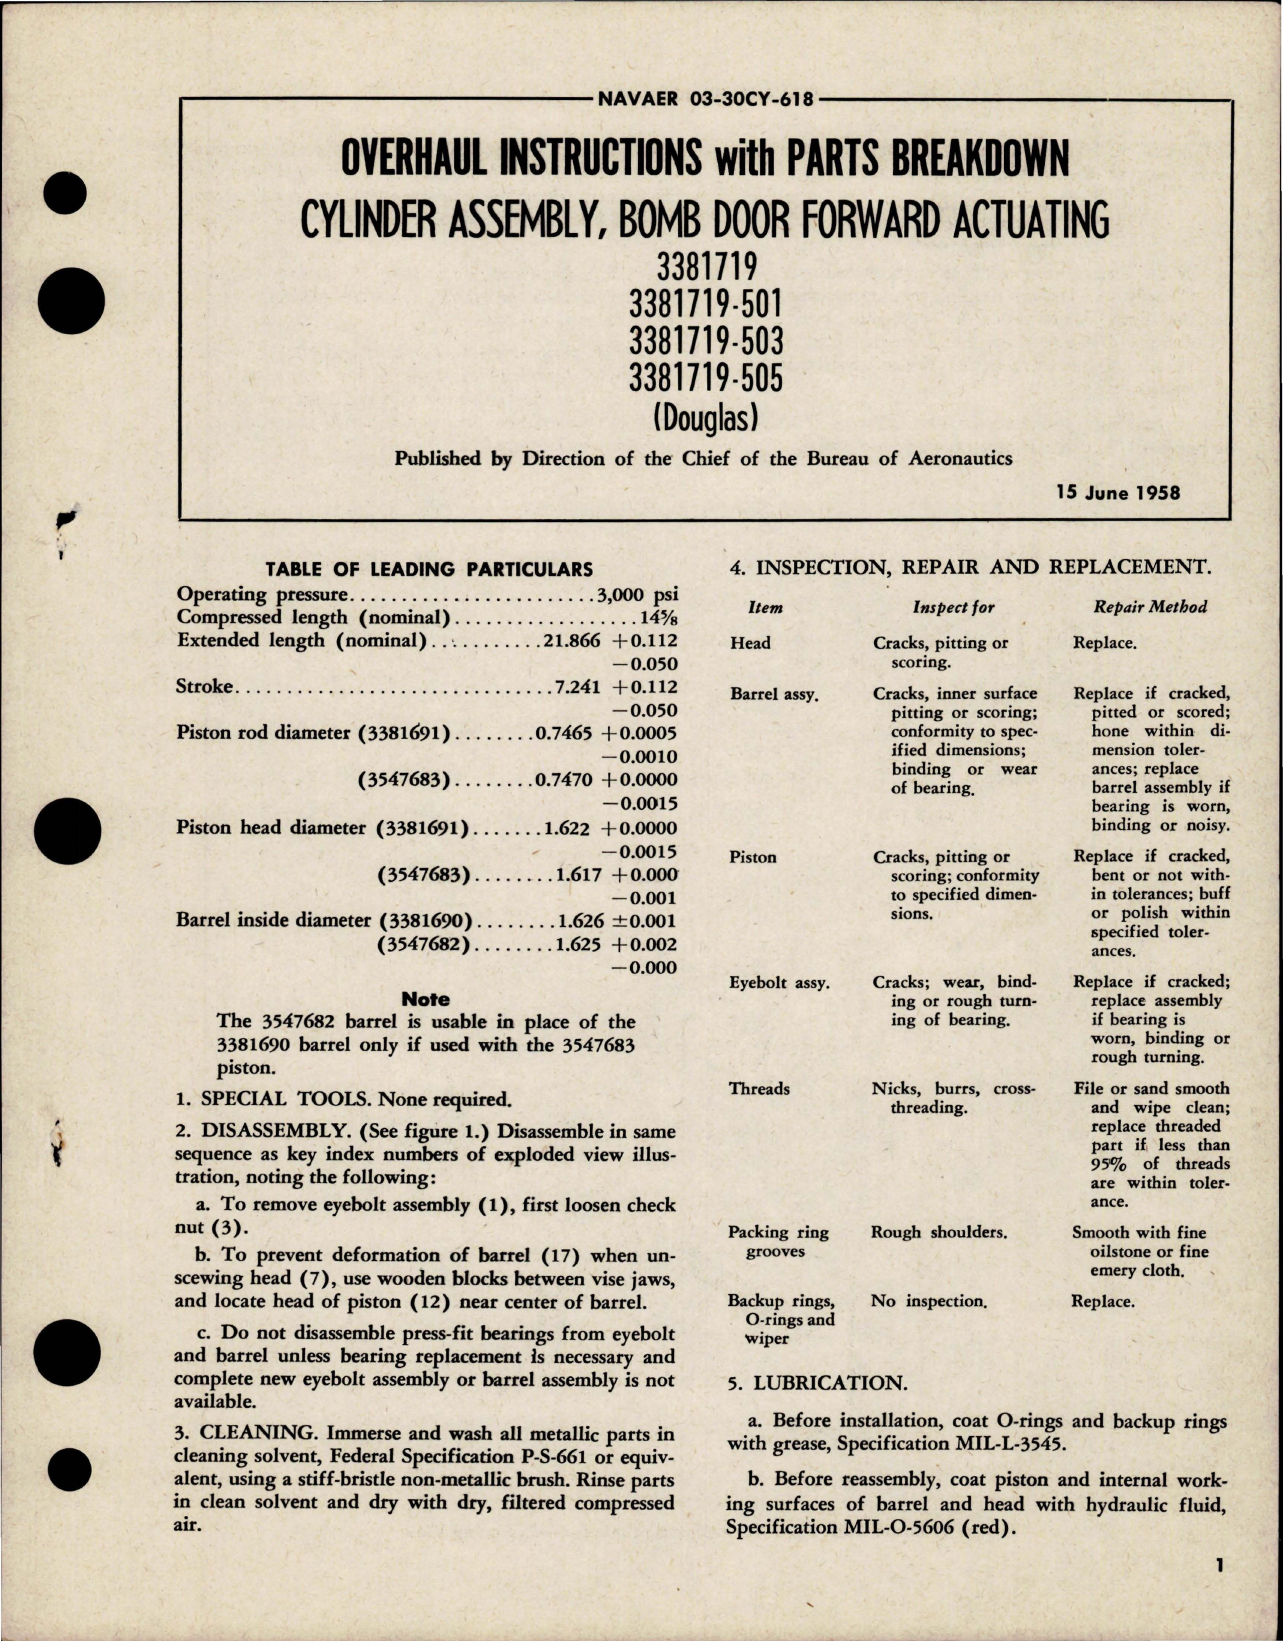 Sample page 1 from AirCorps Library document: Overhaul Instructions with Parts for Bomb Door Forward Actuating Cylinder Assembly